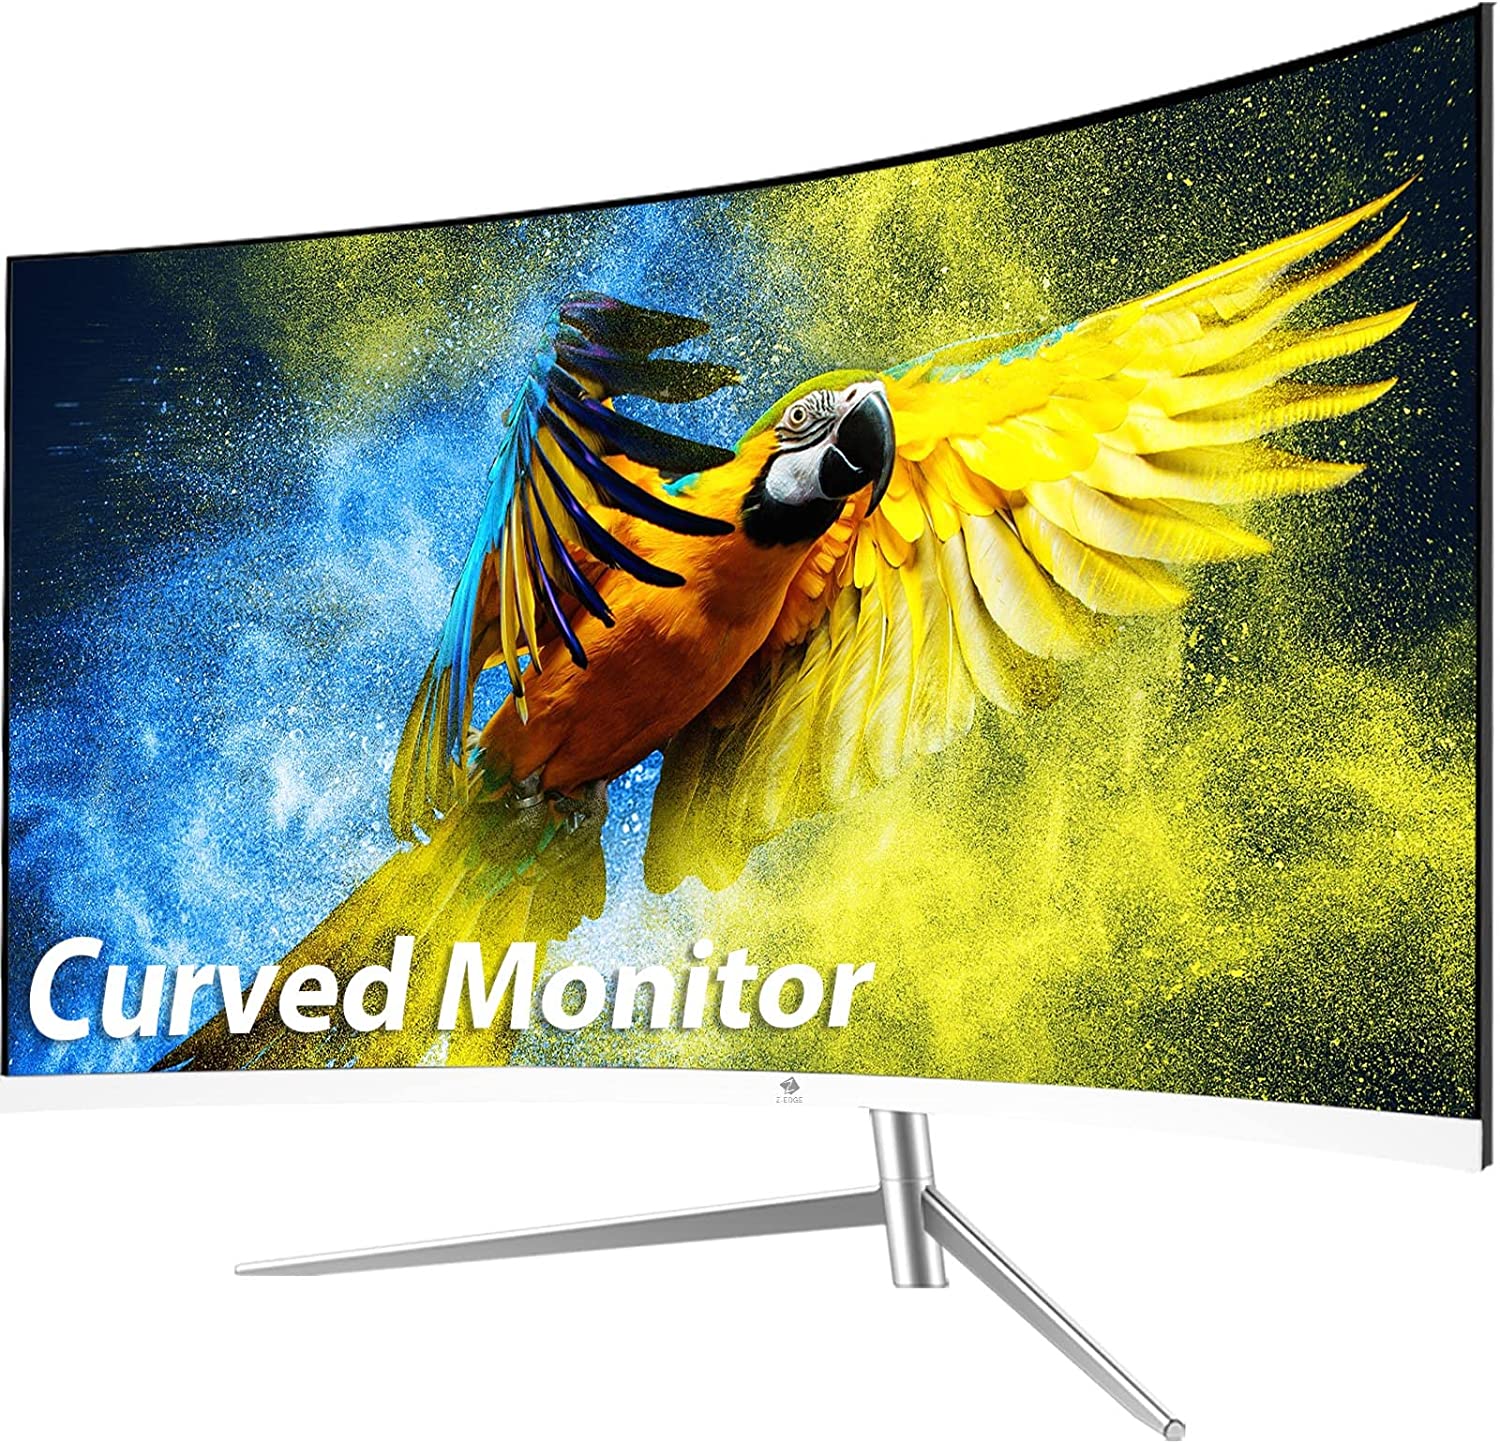 Z-Edge 27-inch Curved Gaming Monitor, Full HD 1080P [...]